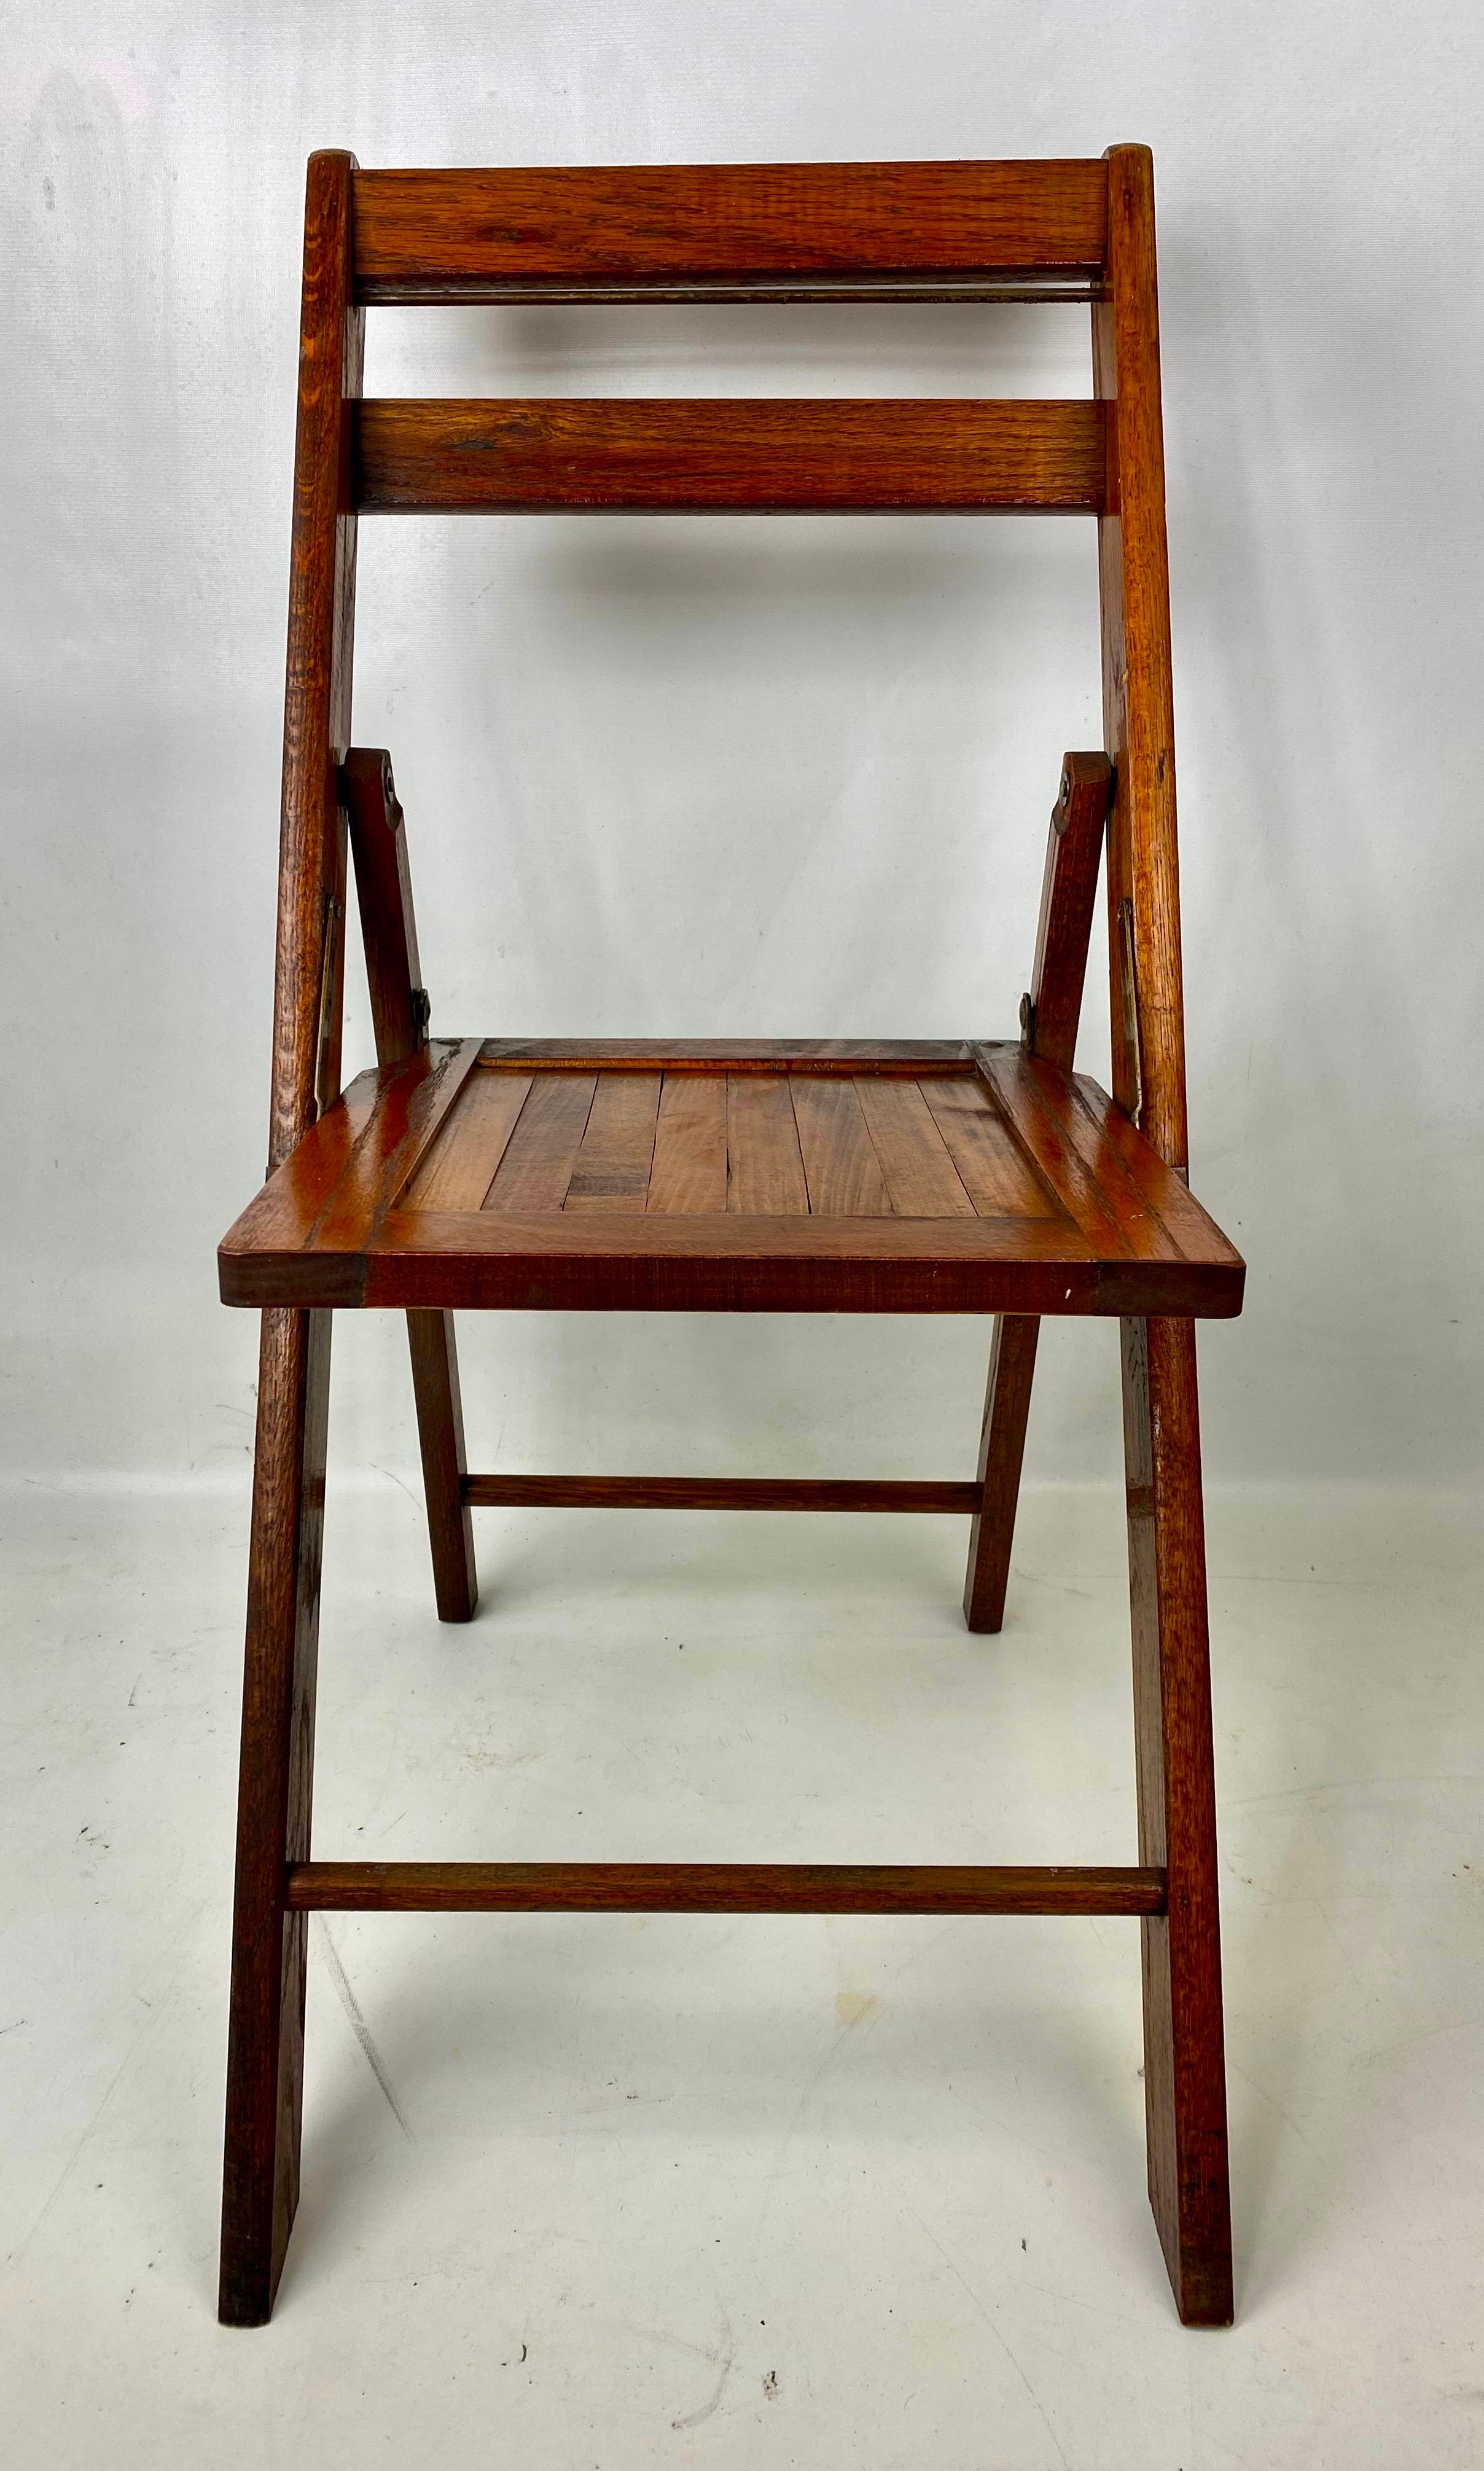 Vintage folding solid wood chair - 19 available

Great opportunity to buy 1 or all 19.